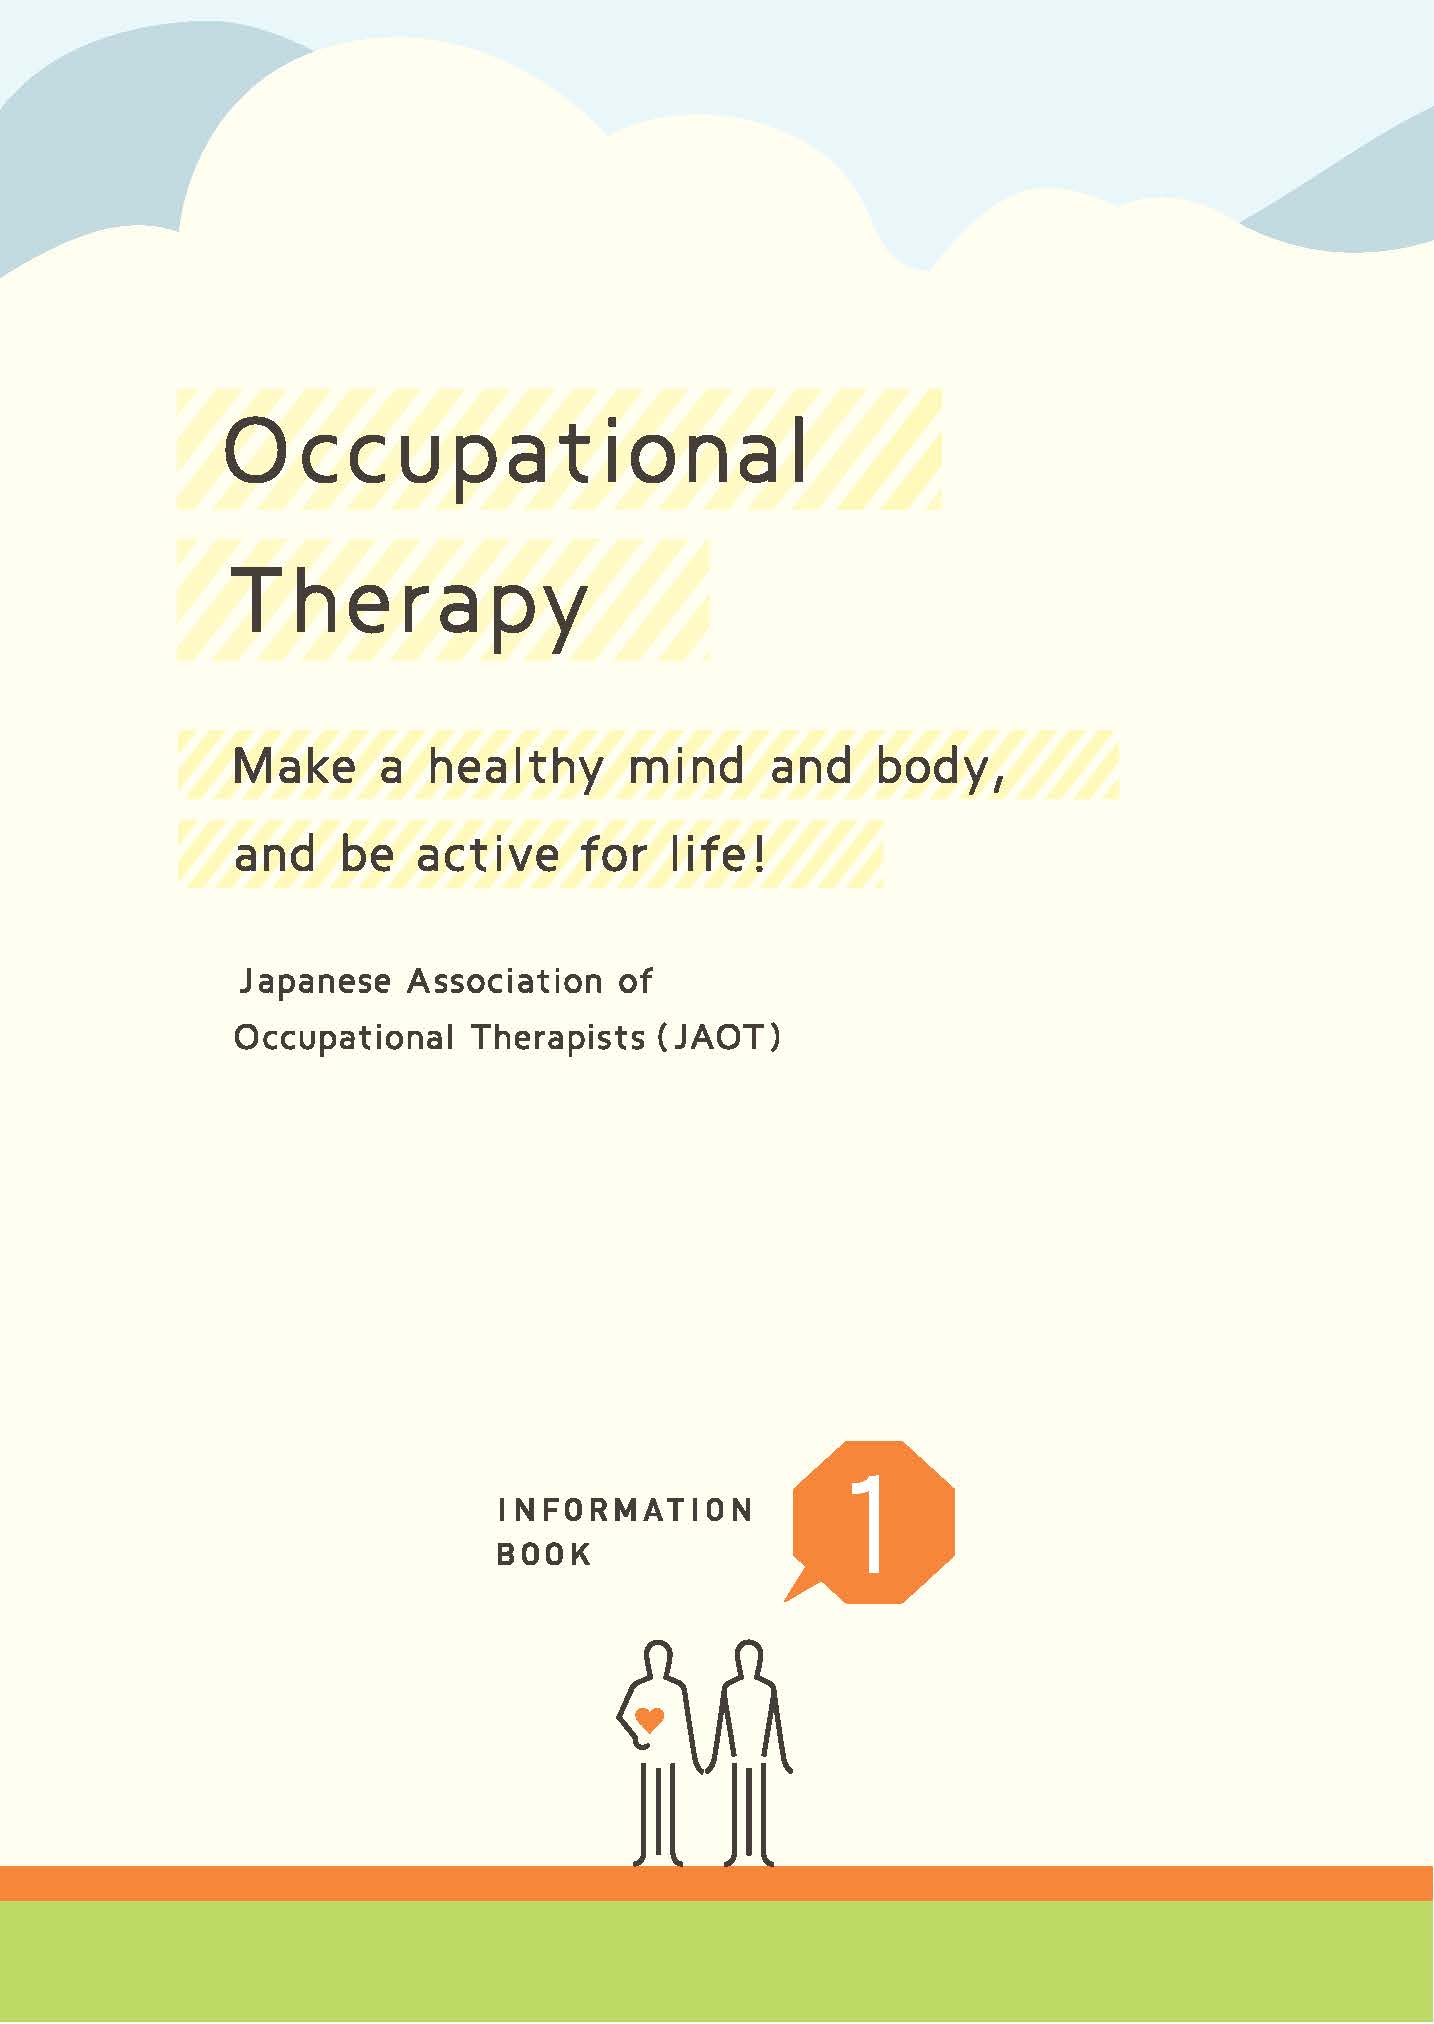 Holding occupational therapy forums